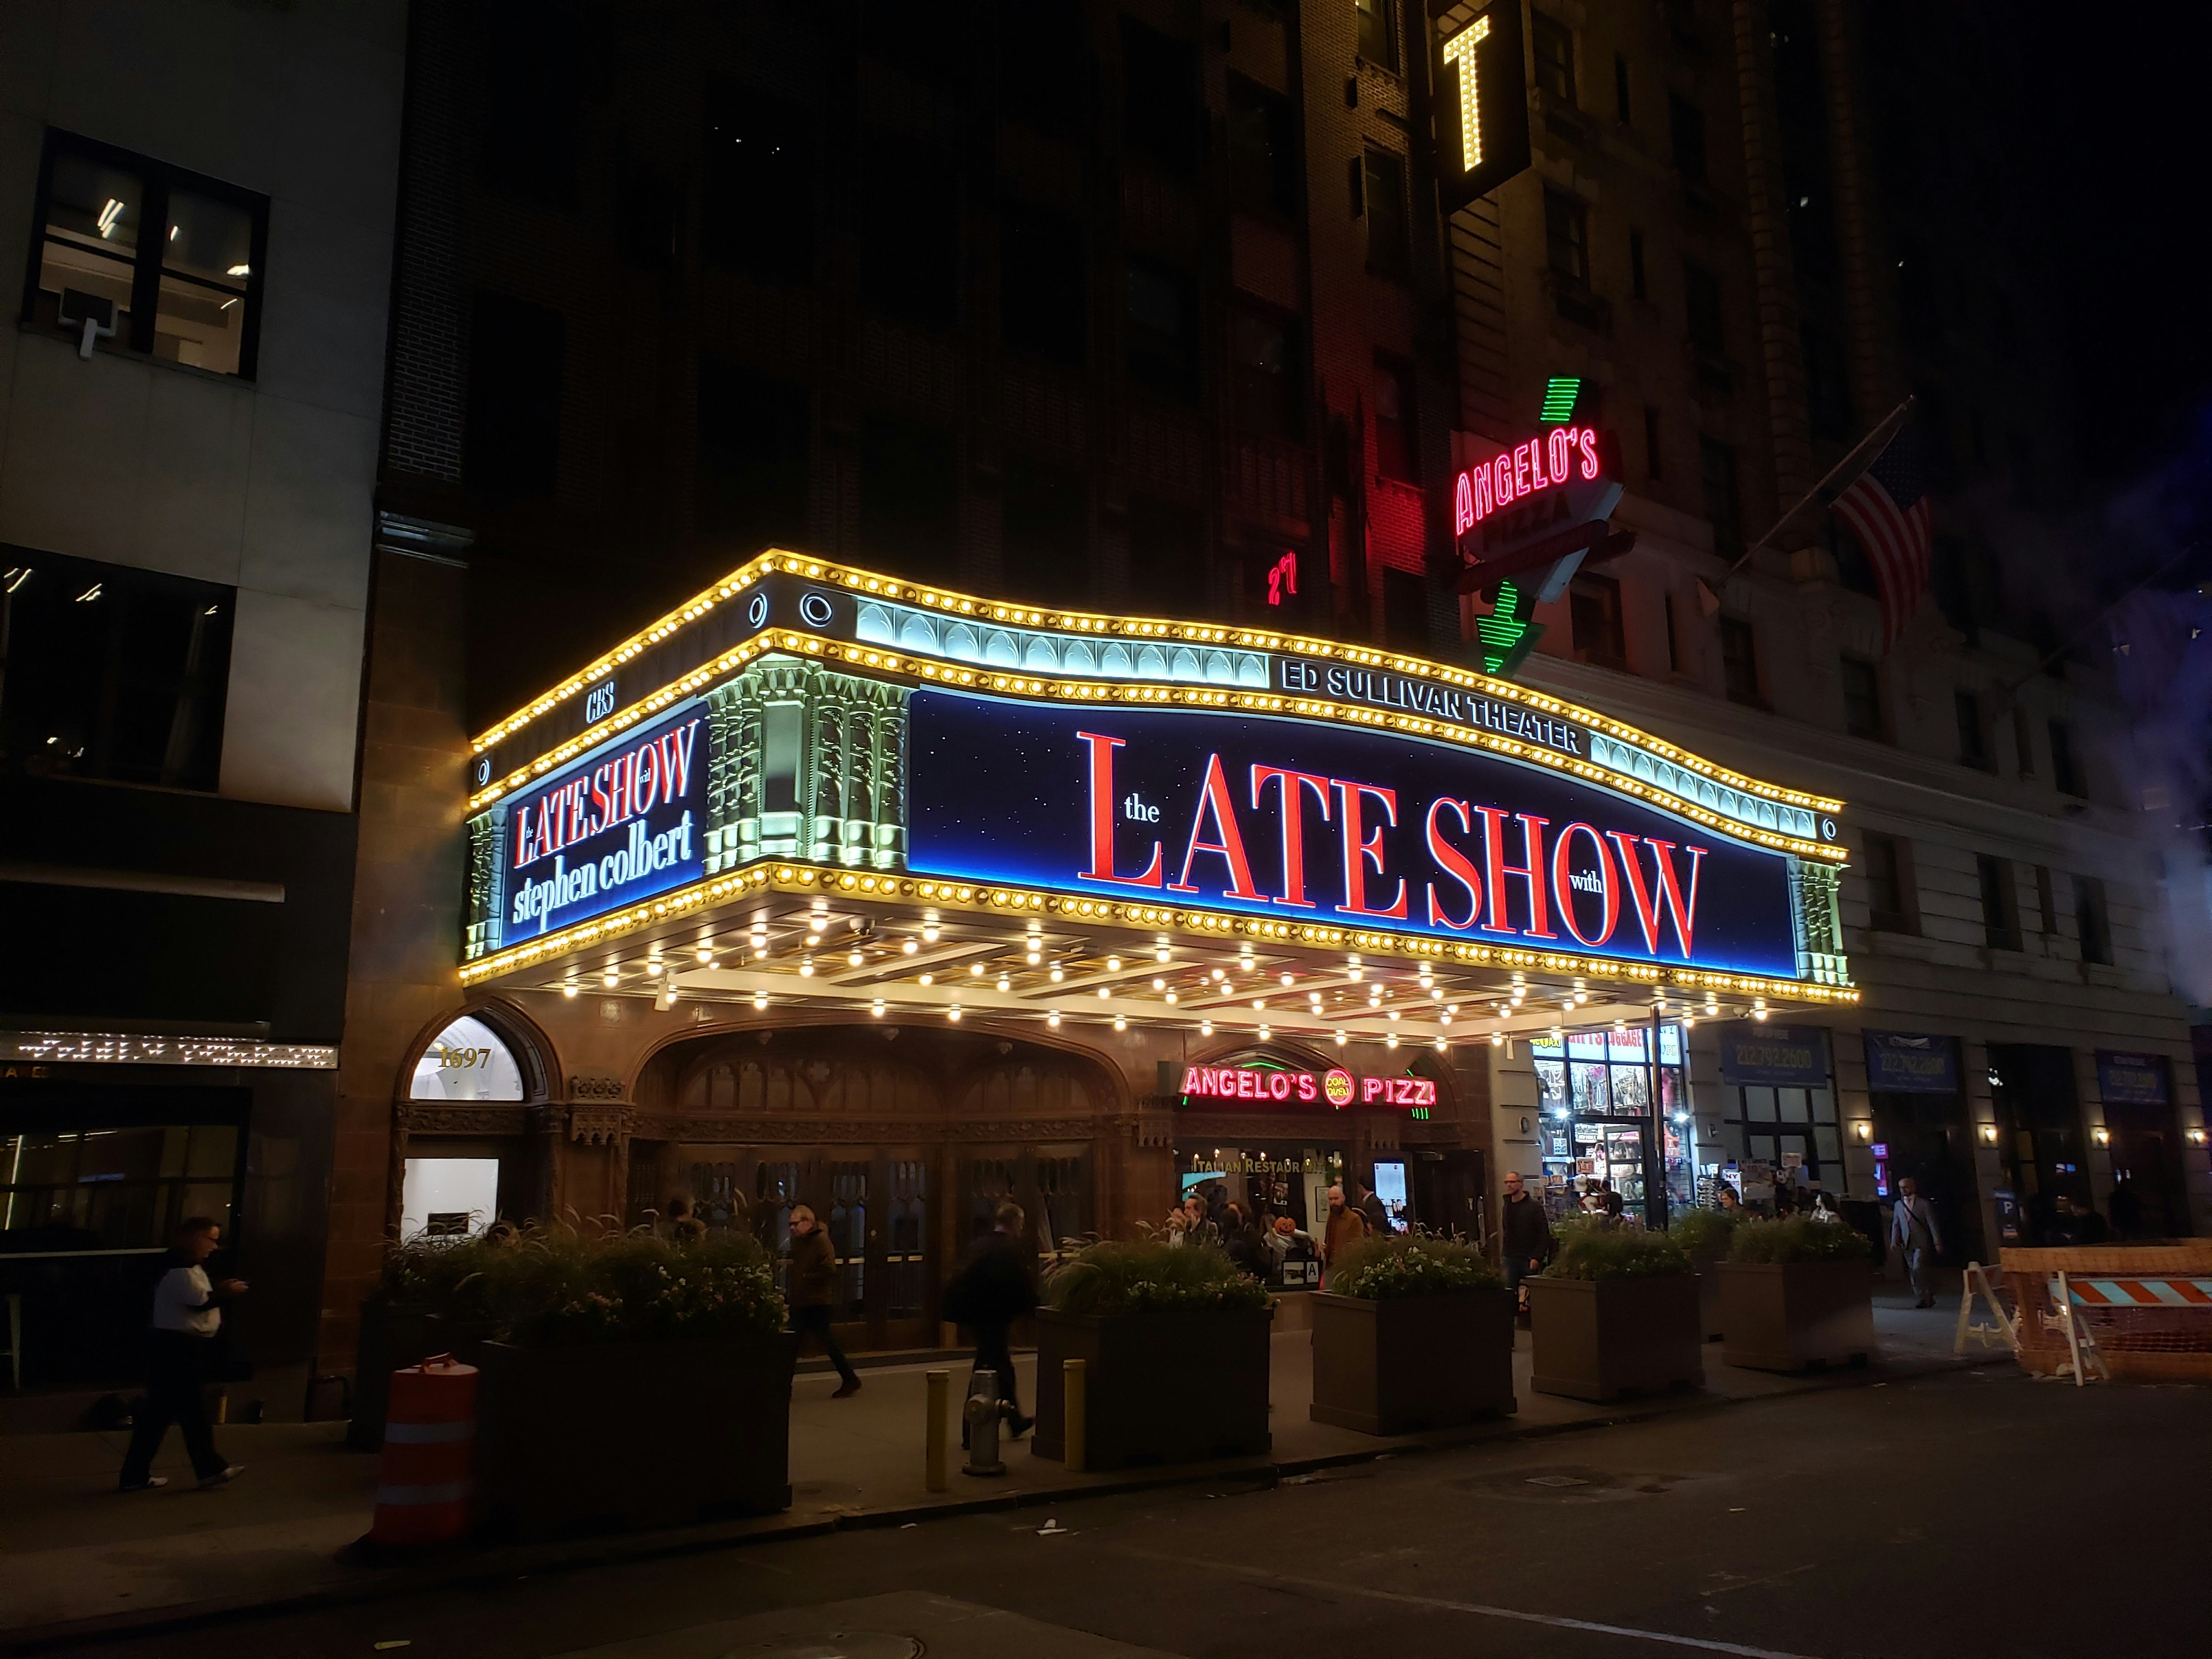 The exterior of the Ed Sullivan Theater shows a vast overhanging marquee with large-bulb theater lights on the underside and The Late Show lit up in red serif letters on the front. Large square planters that double as traffic bollards sit between the street and the entrance, where pedestrians stroll past a neon sign for Angelo's Pizza inside the theater.